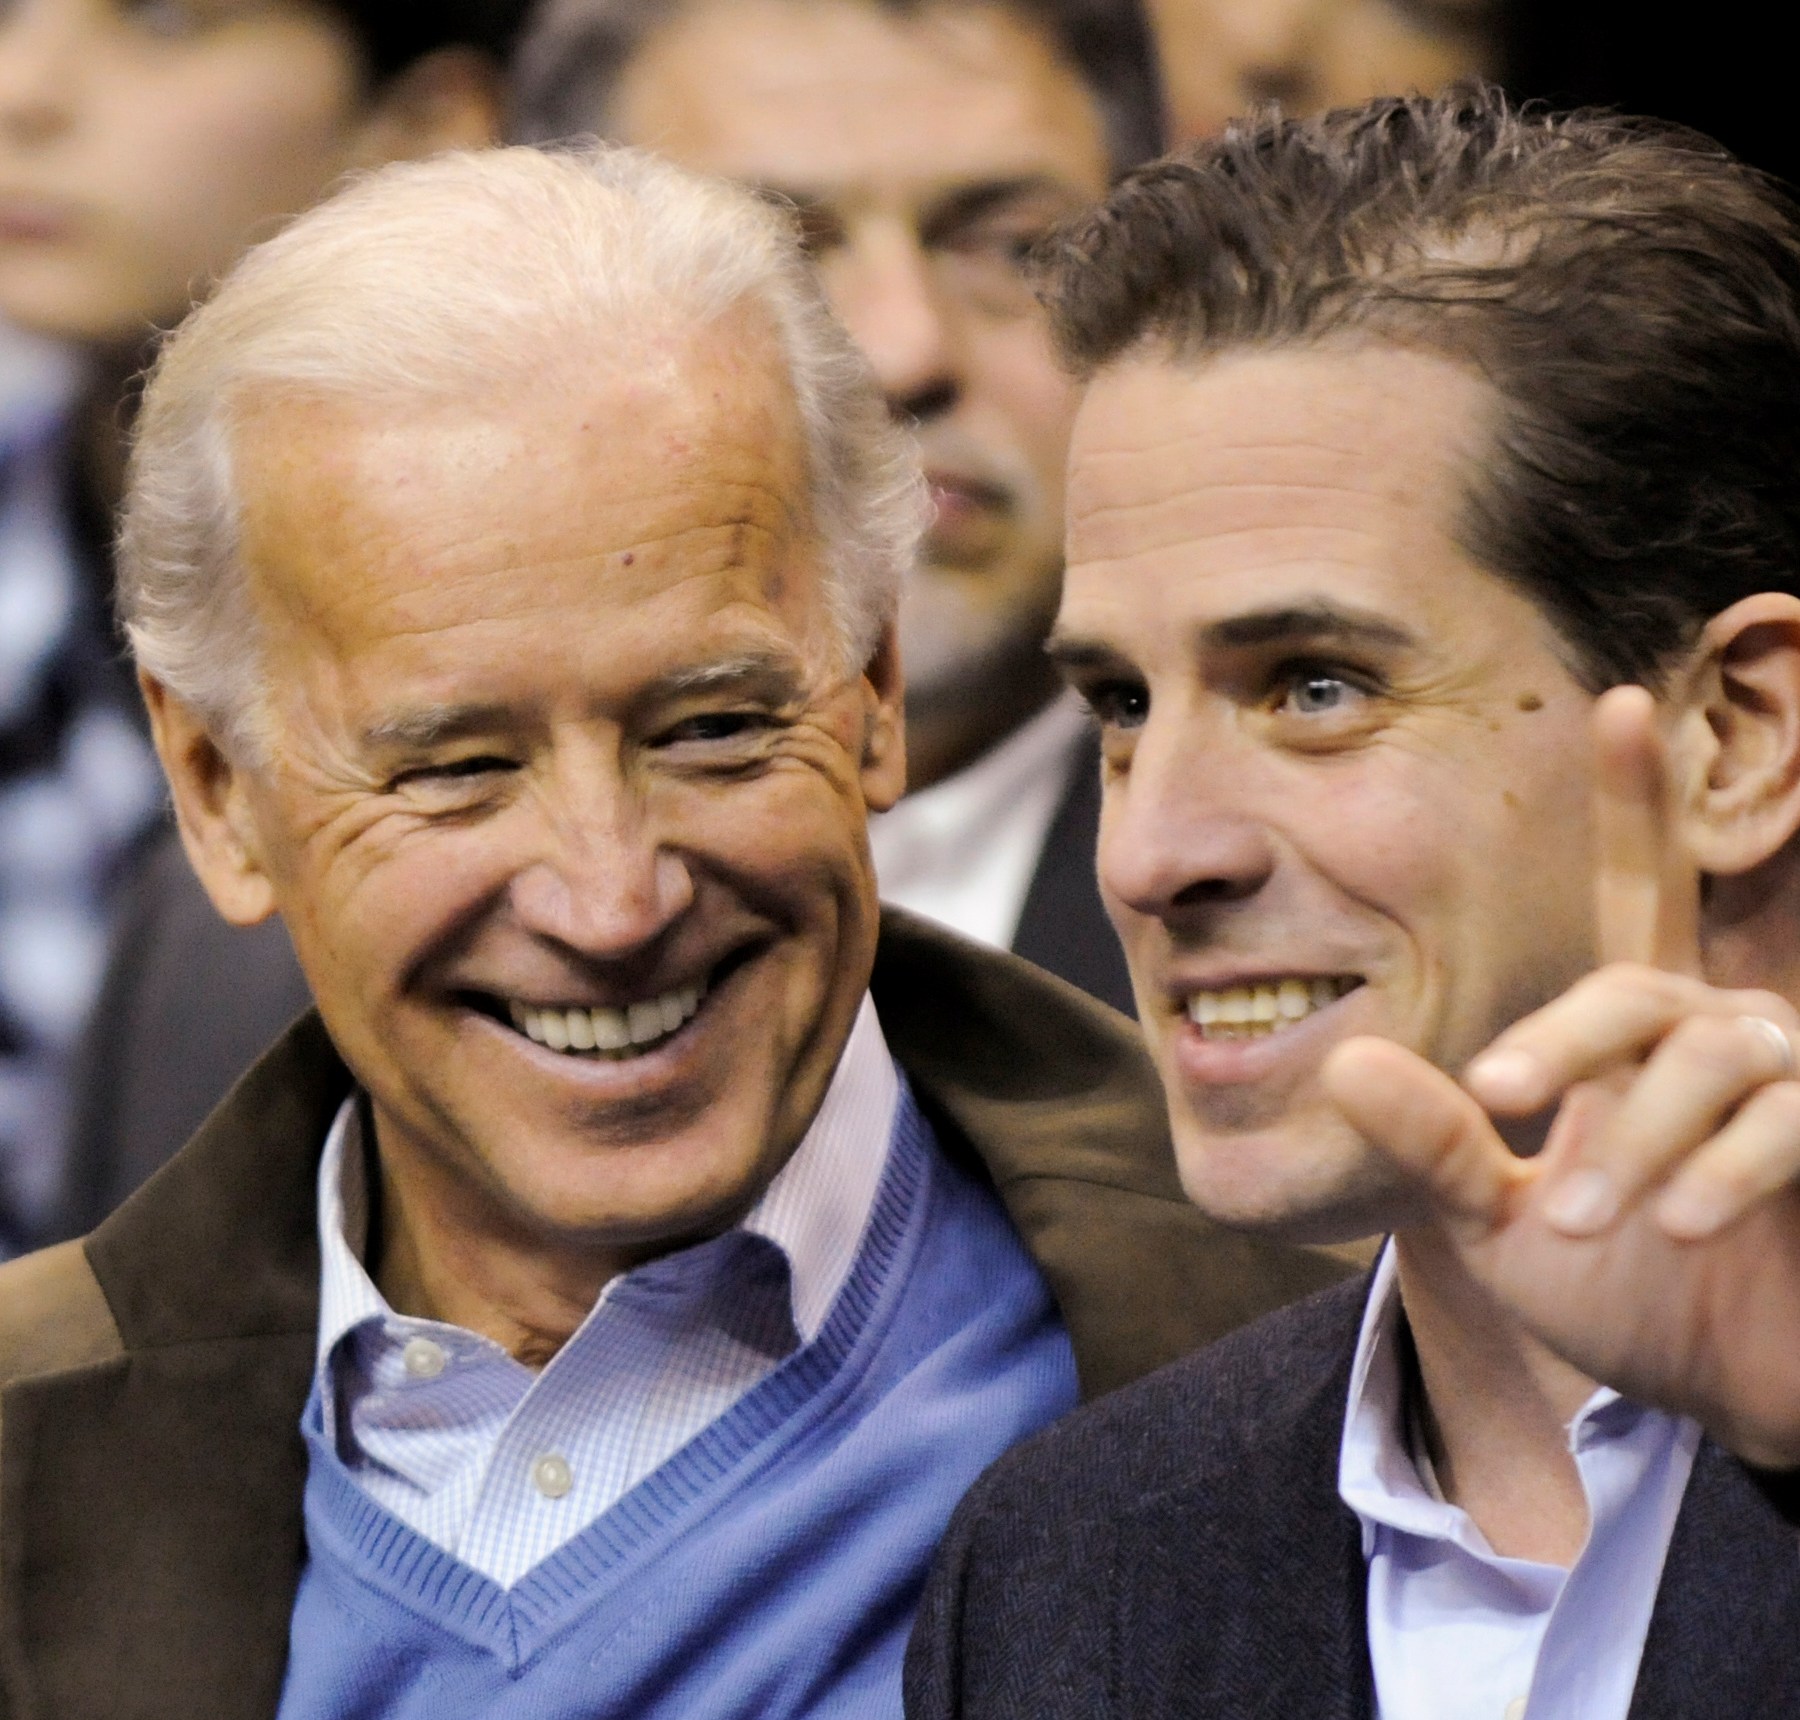 What's the deal with the Hunter Biden email | Elections 2020 News | Al Jazeera